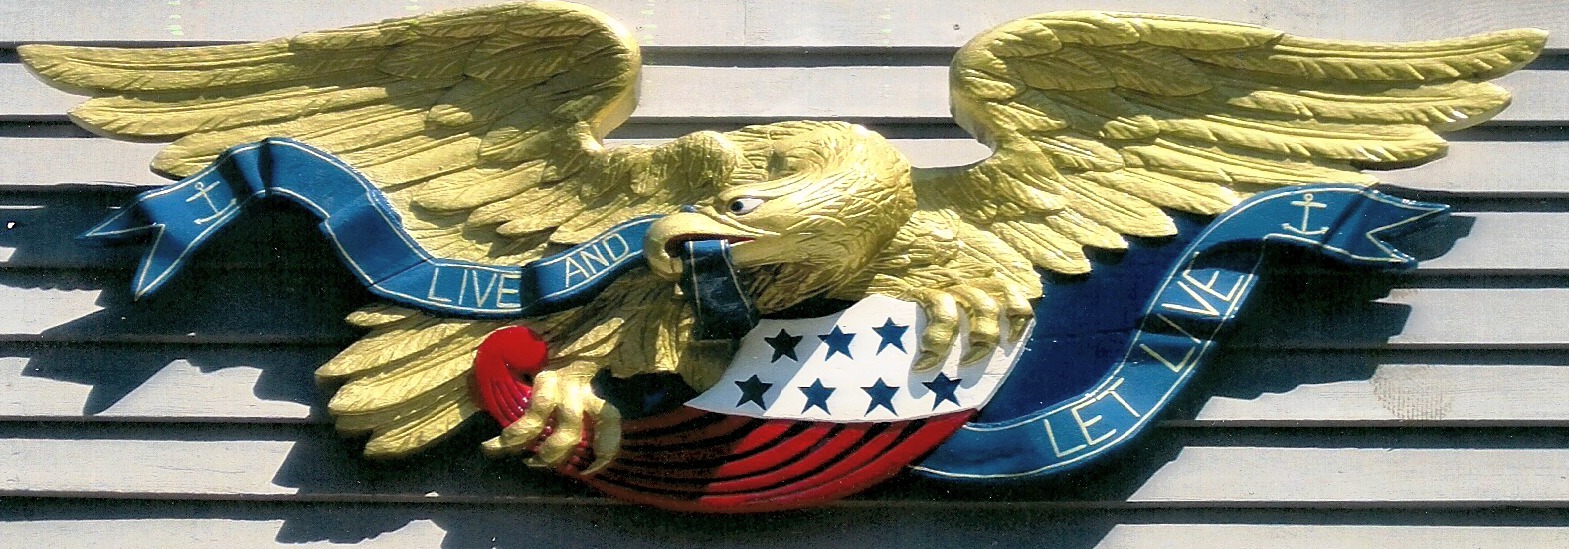 Eagle with gold paint from R Menders Inc